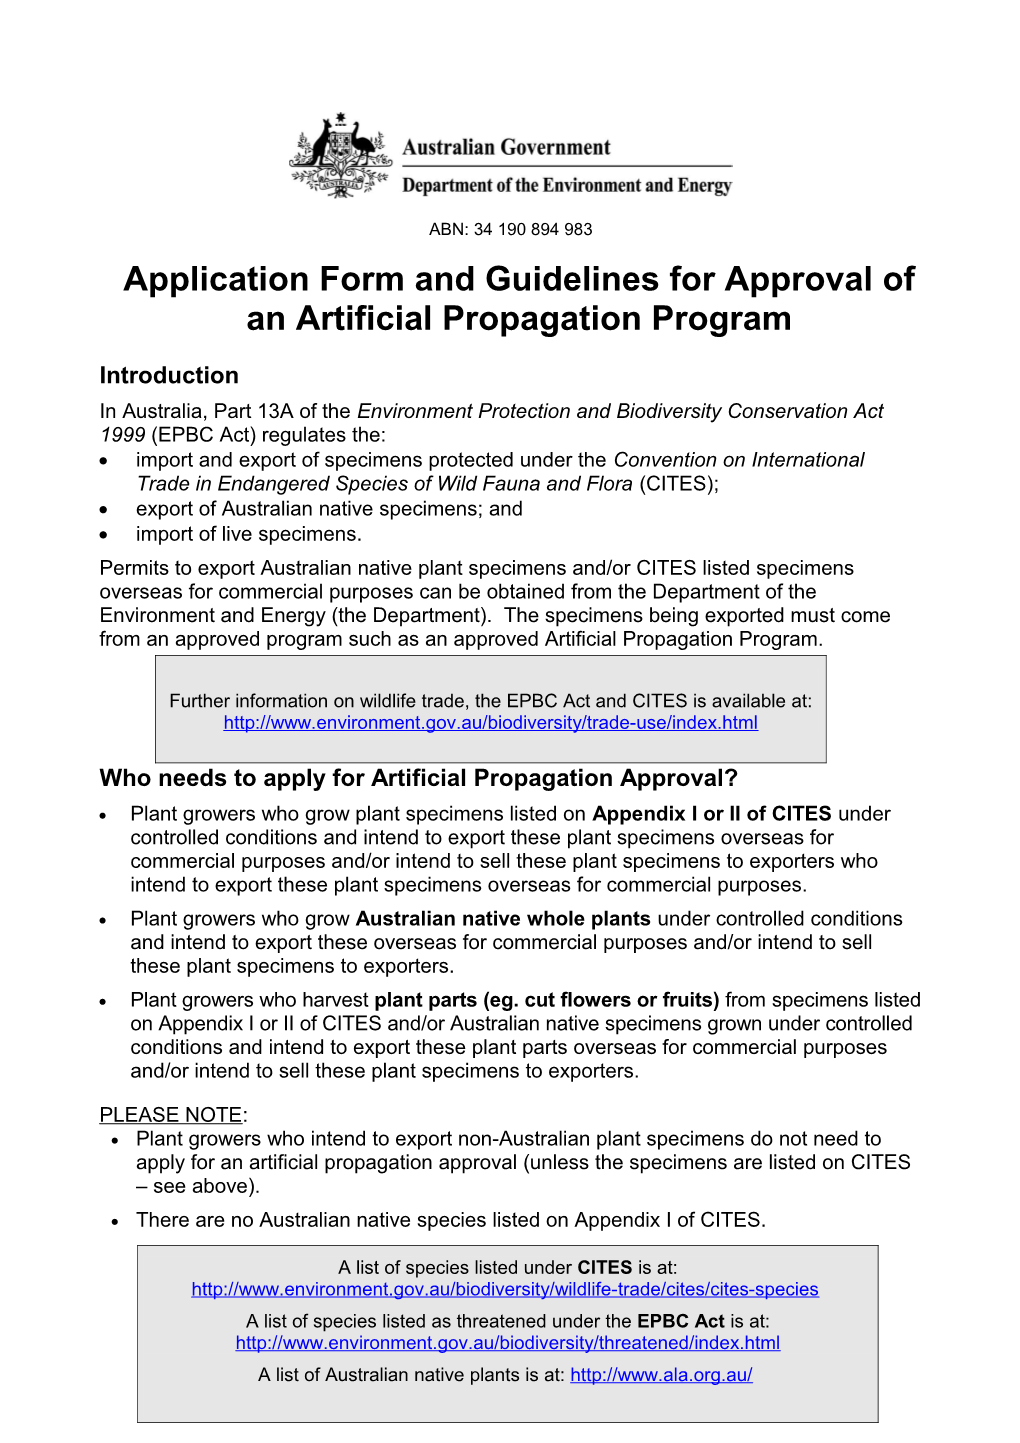 Application Form and Guidelines for Approval of an Artificial Propagation Program